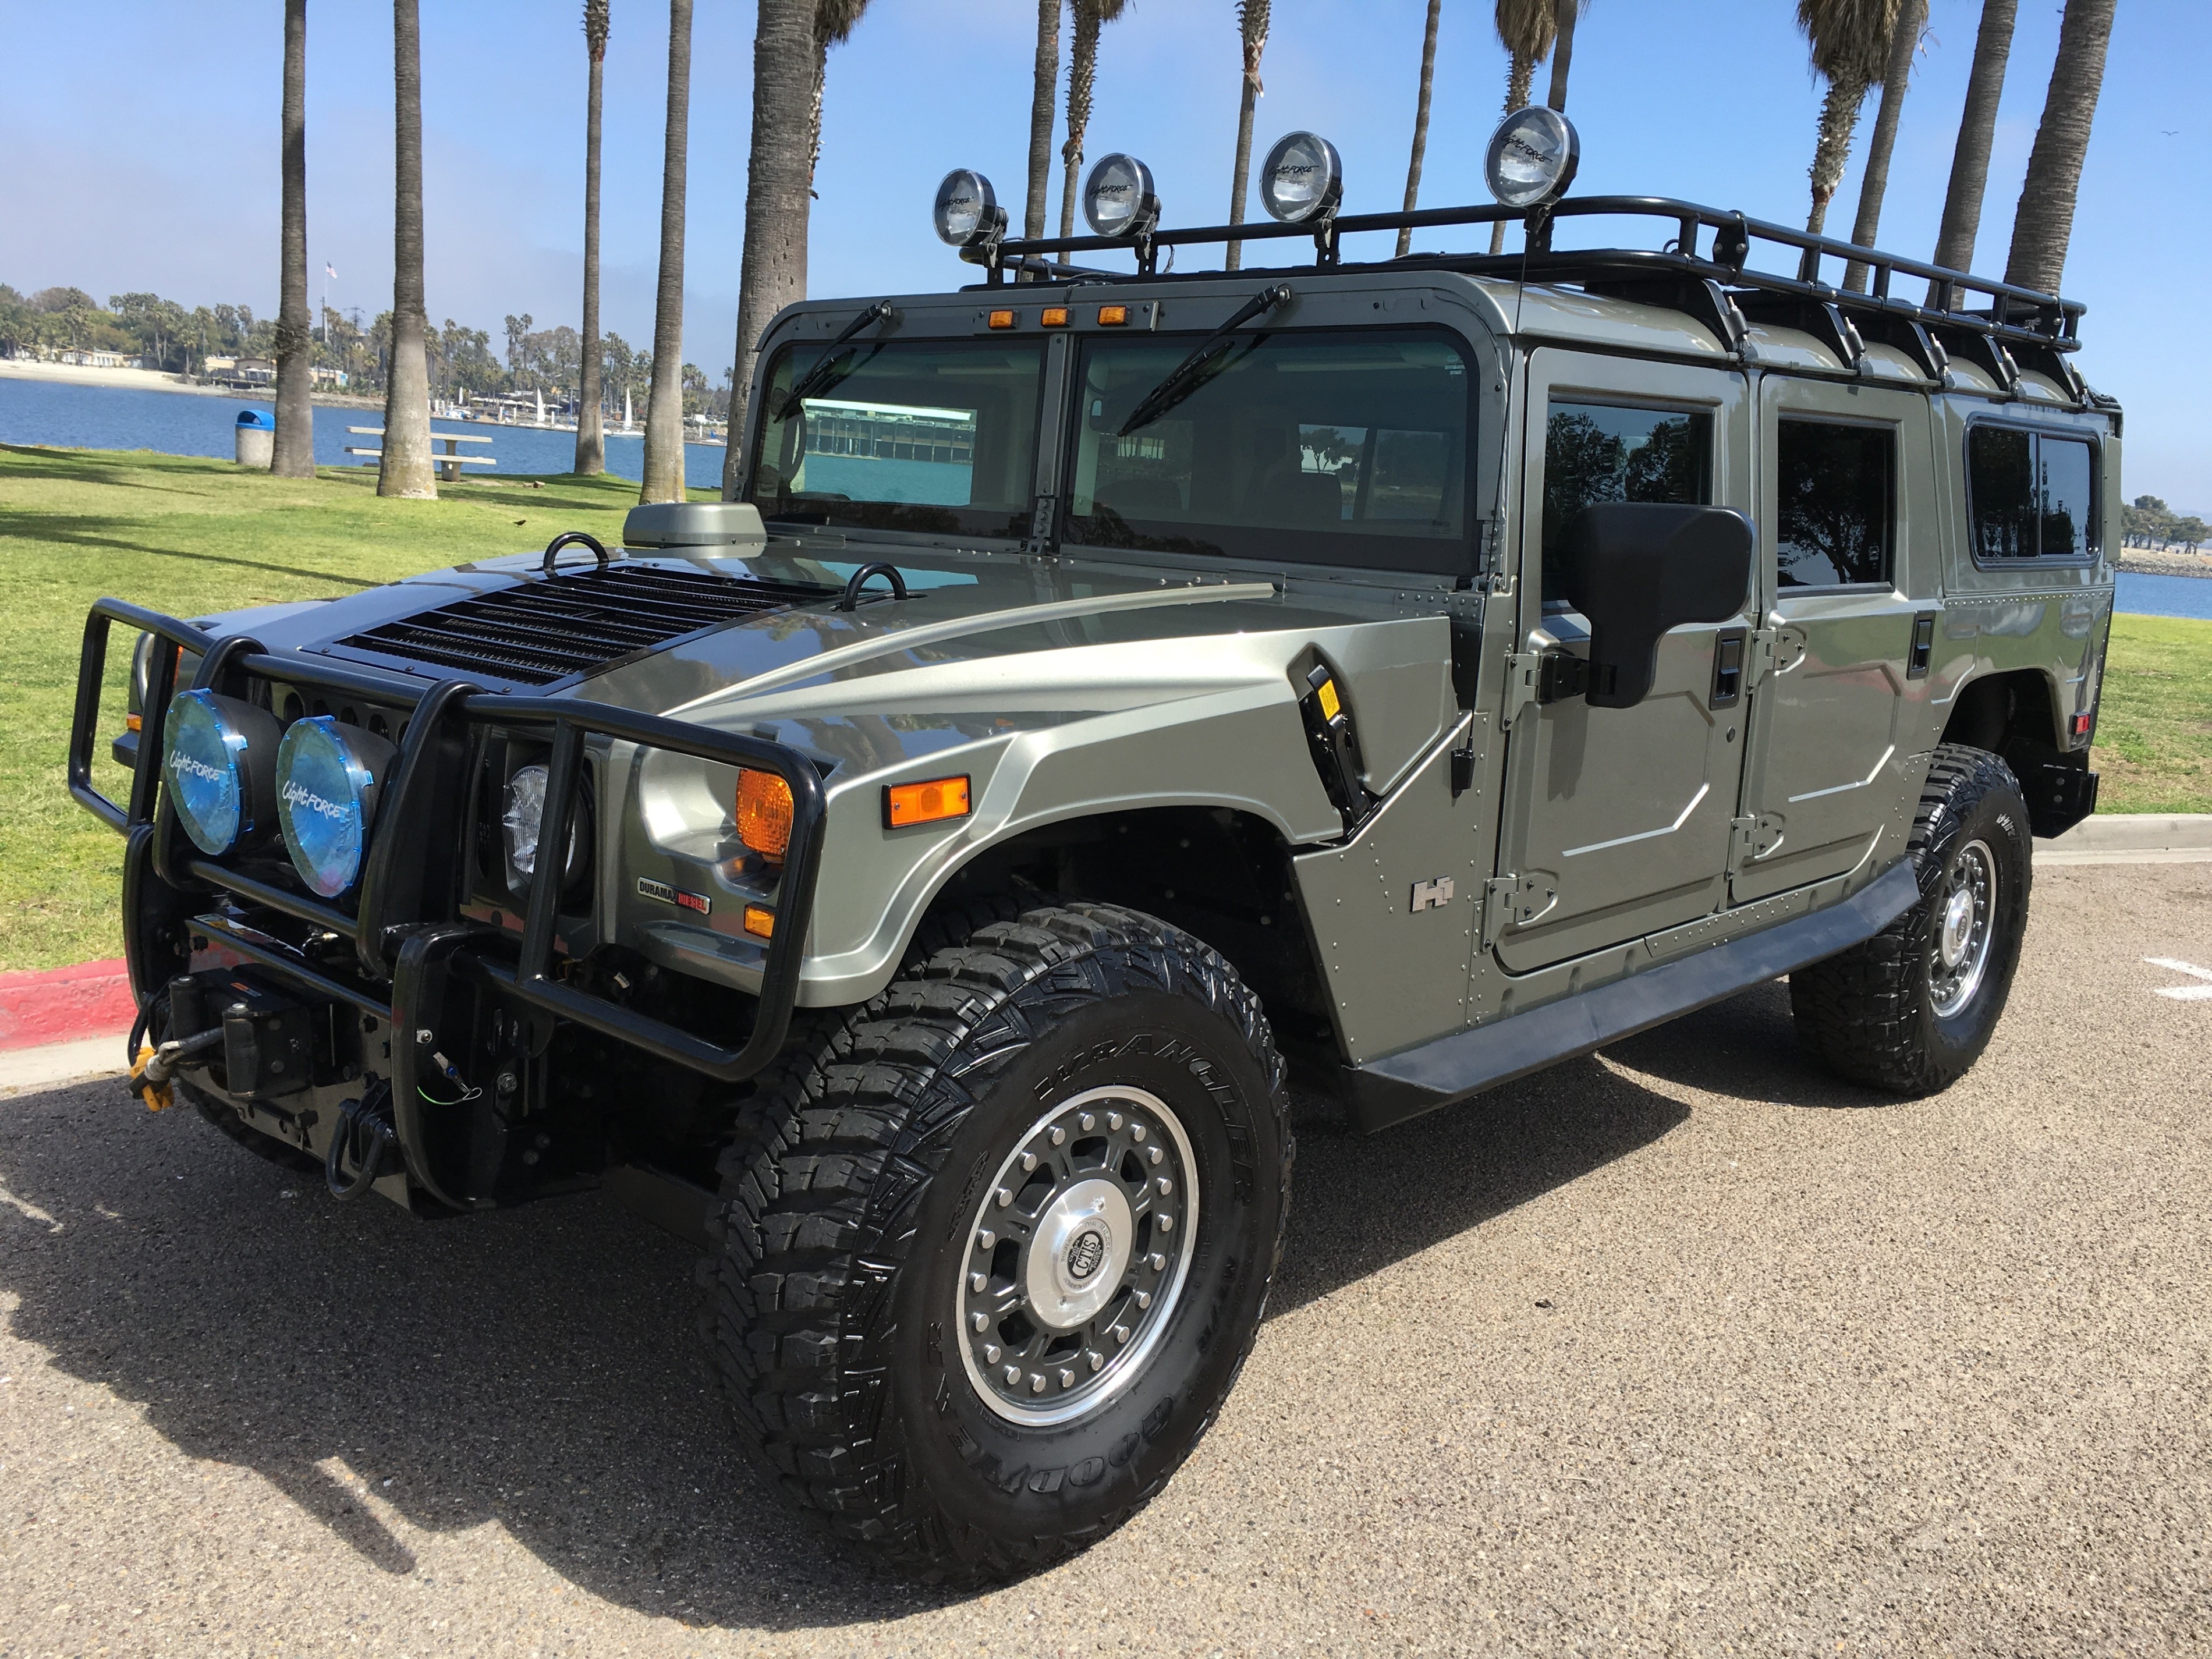 sold……..2006 Hummer H1 Alpha 2nd gen 1 of 13 mystic green 10/10 clean low miles